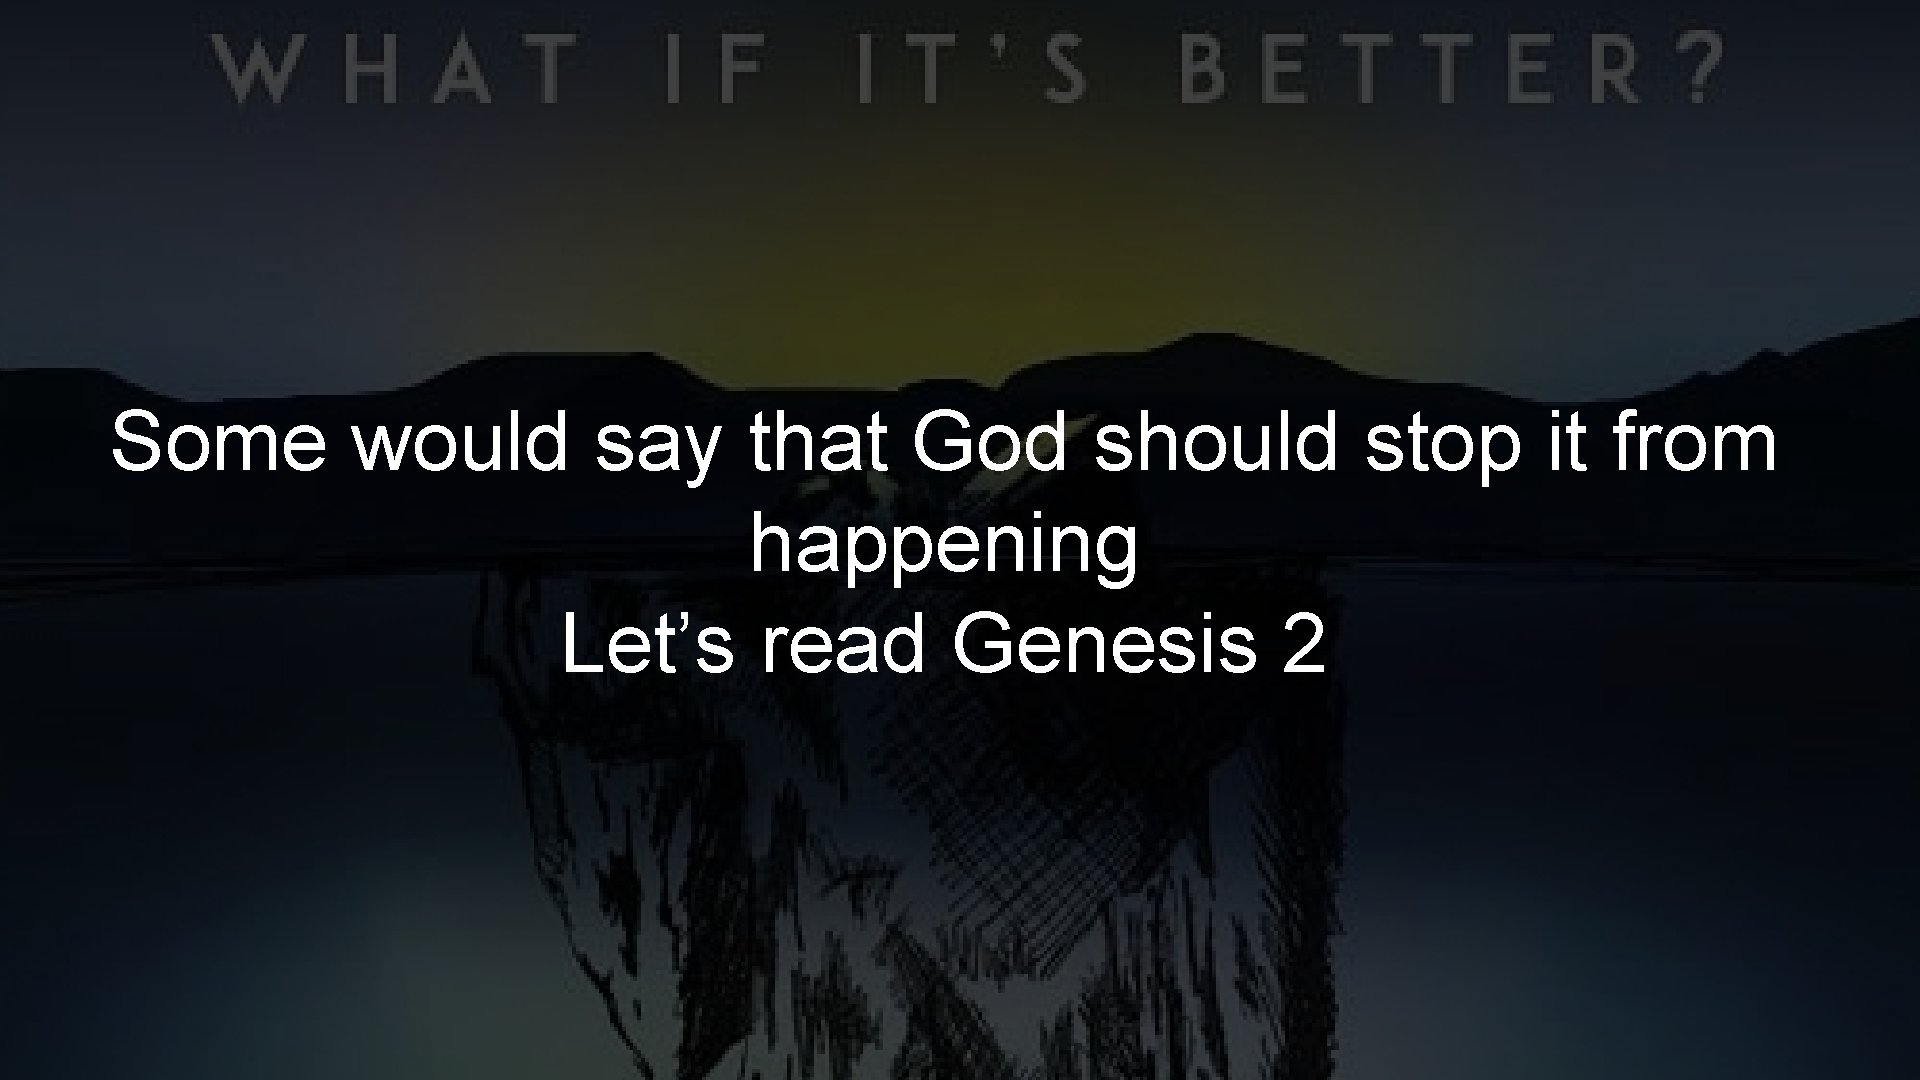 Some would say that God should stop it from happening Let’s read Genesis 2